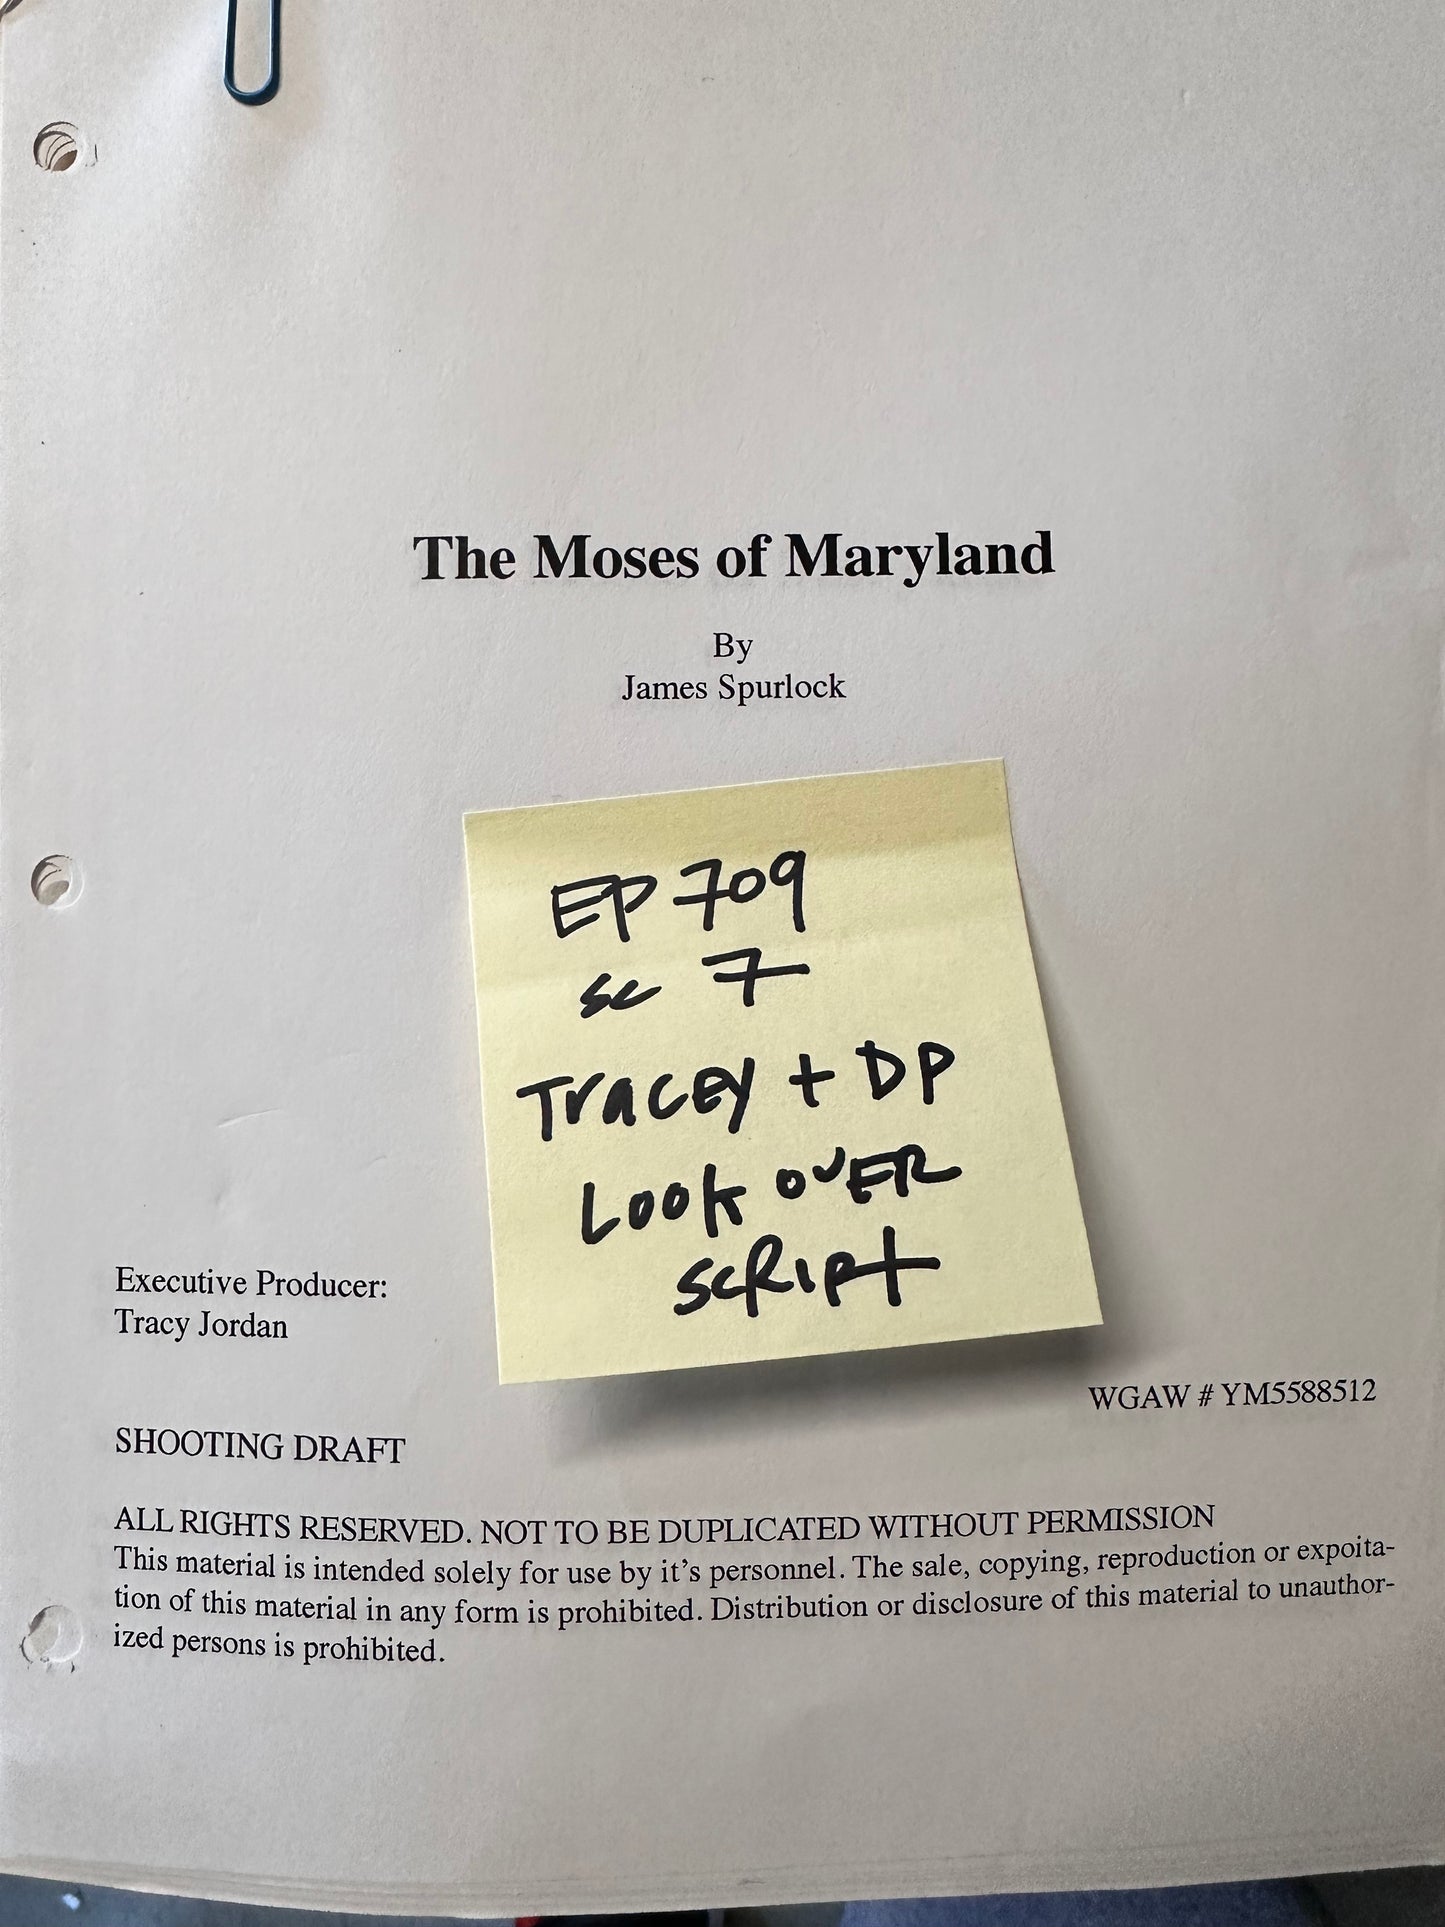 30 Rock: Moses of Maryland Cover Sheet & Faux Draft (2 of 3)